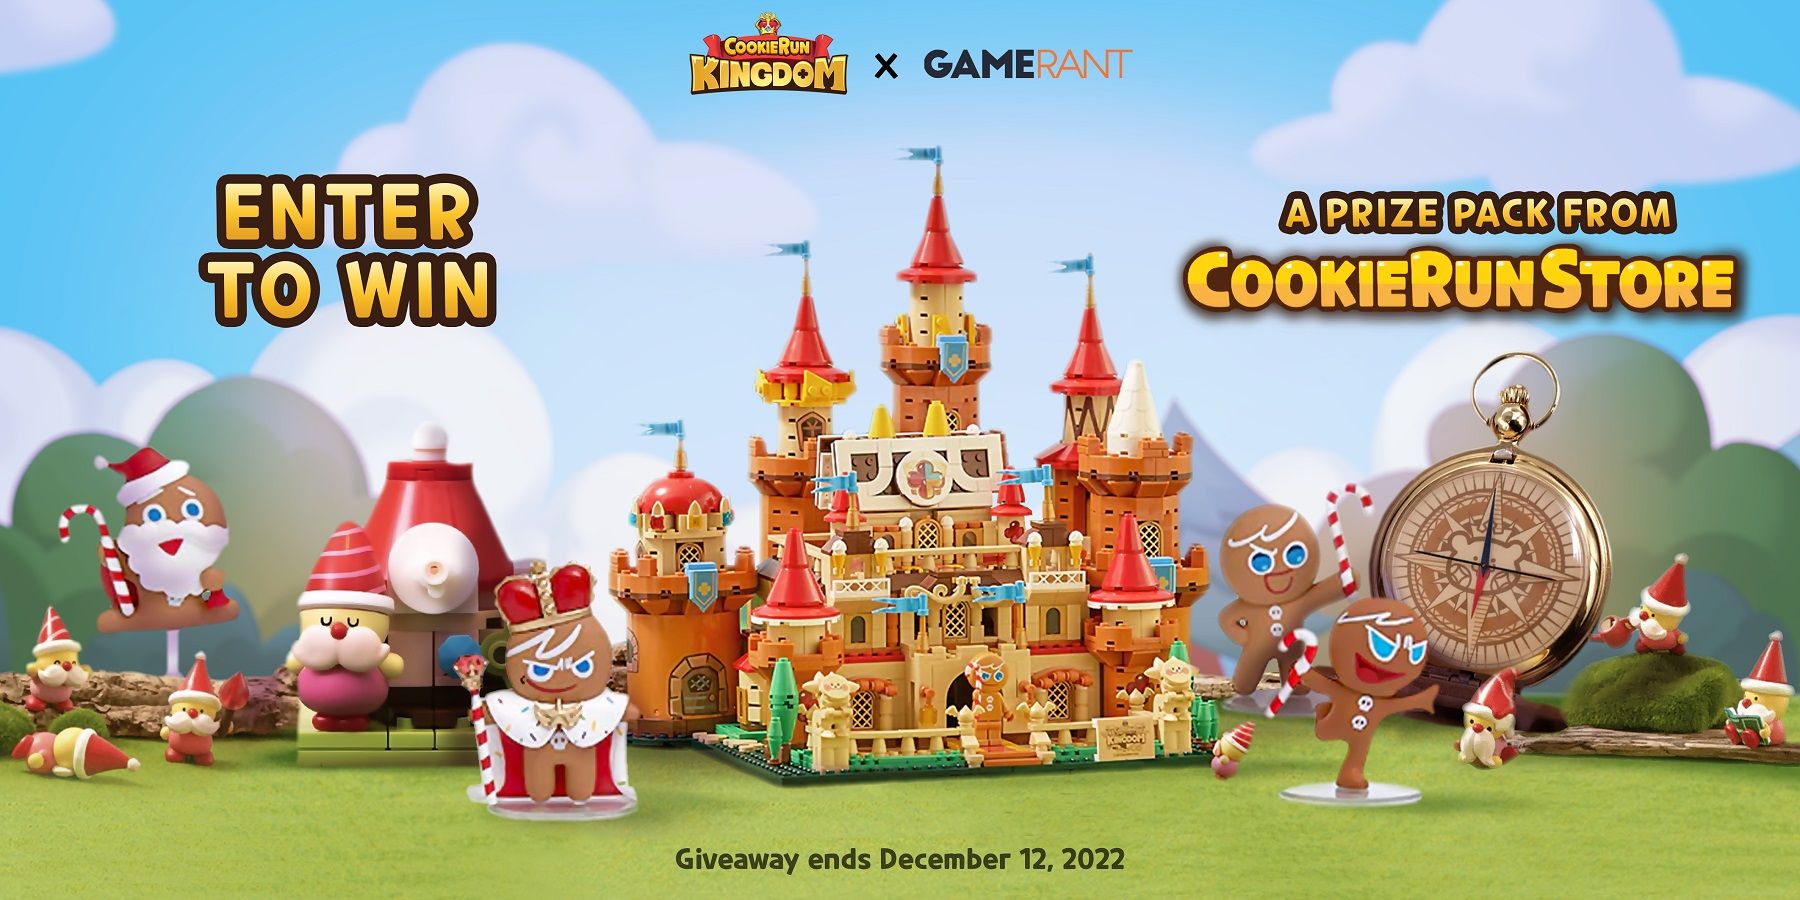 Cookie Run: Kingdom gives you the chance to win $50,000 in its